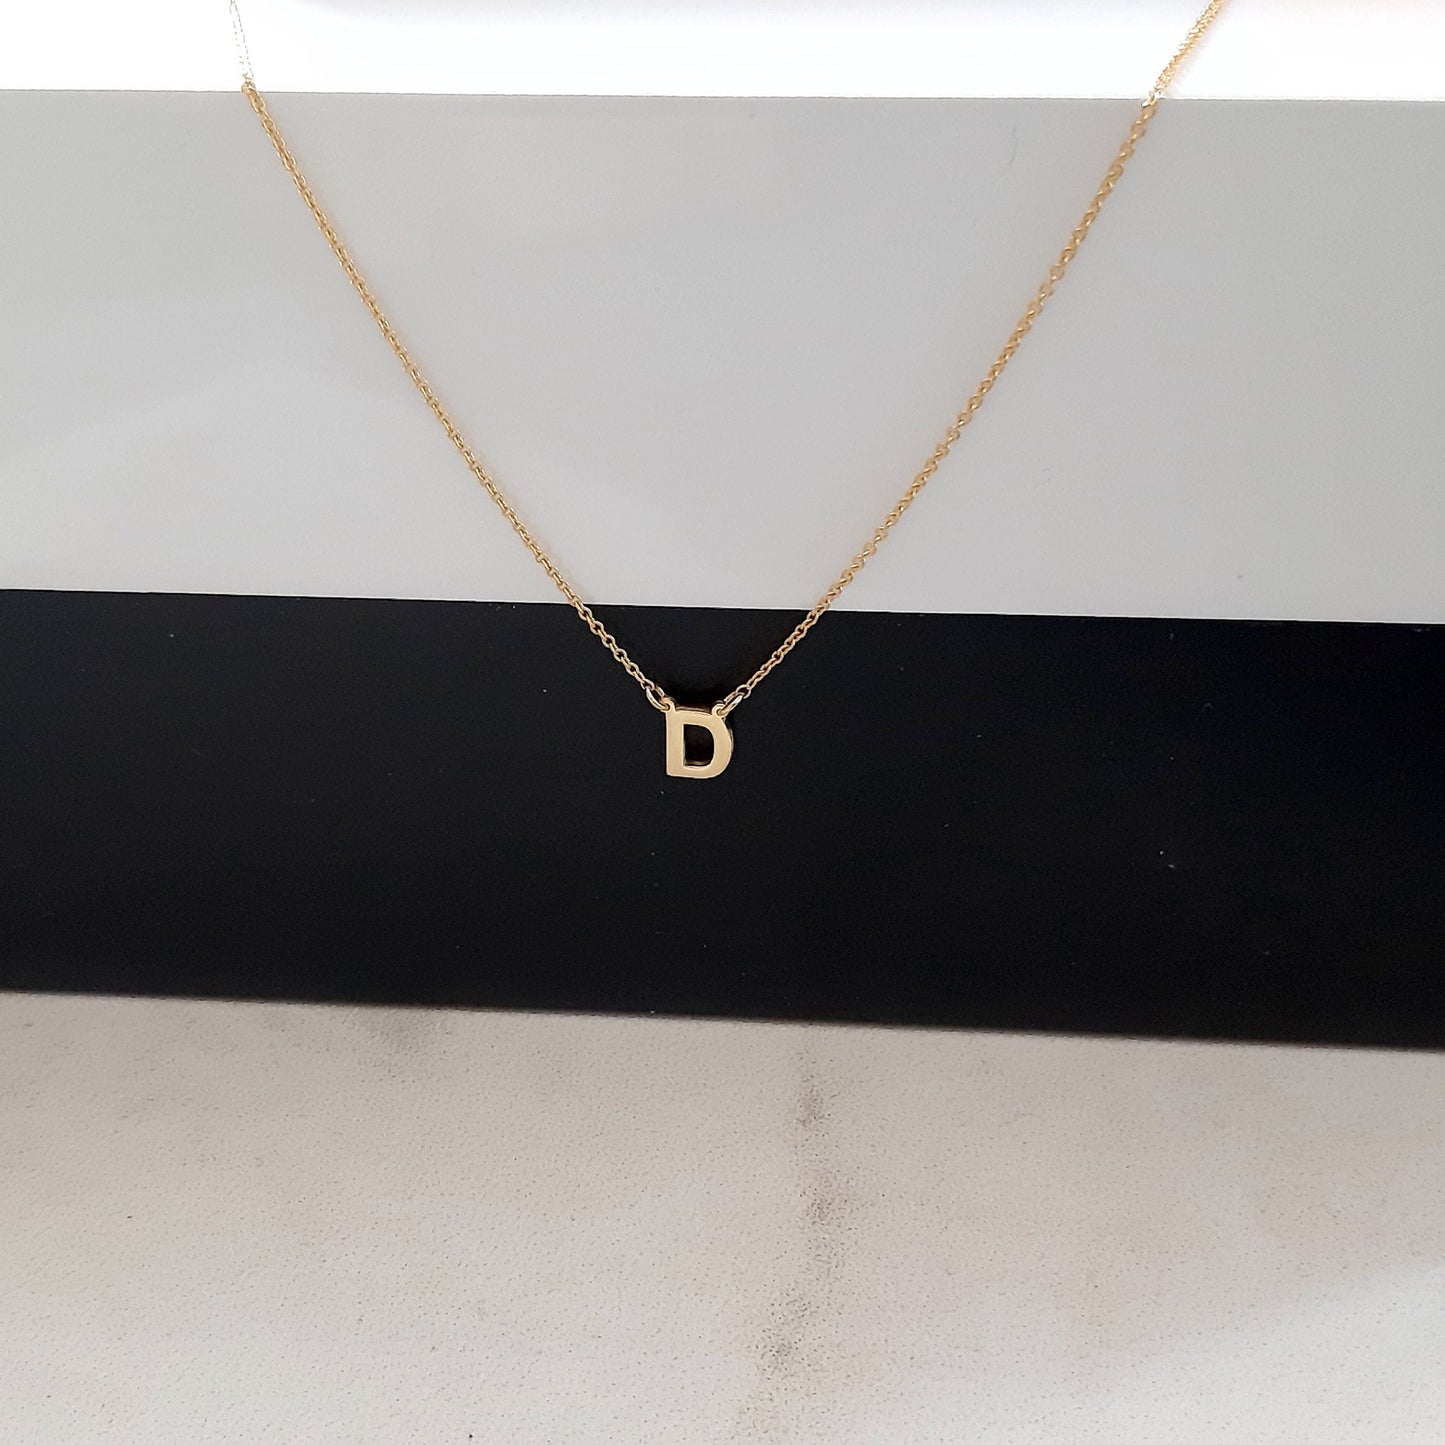 Initial Gold Necklace, 14k Solid Gold Necklace, Gift Necklace, Sideways Necklace, Sideways Letter Necklace, Dainty Necklace layered necklace